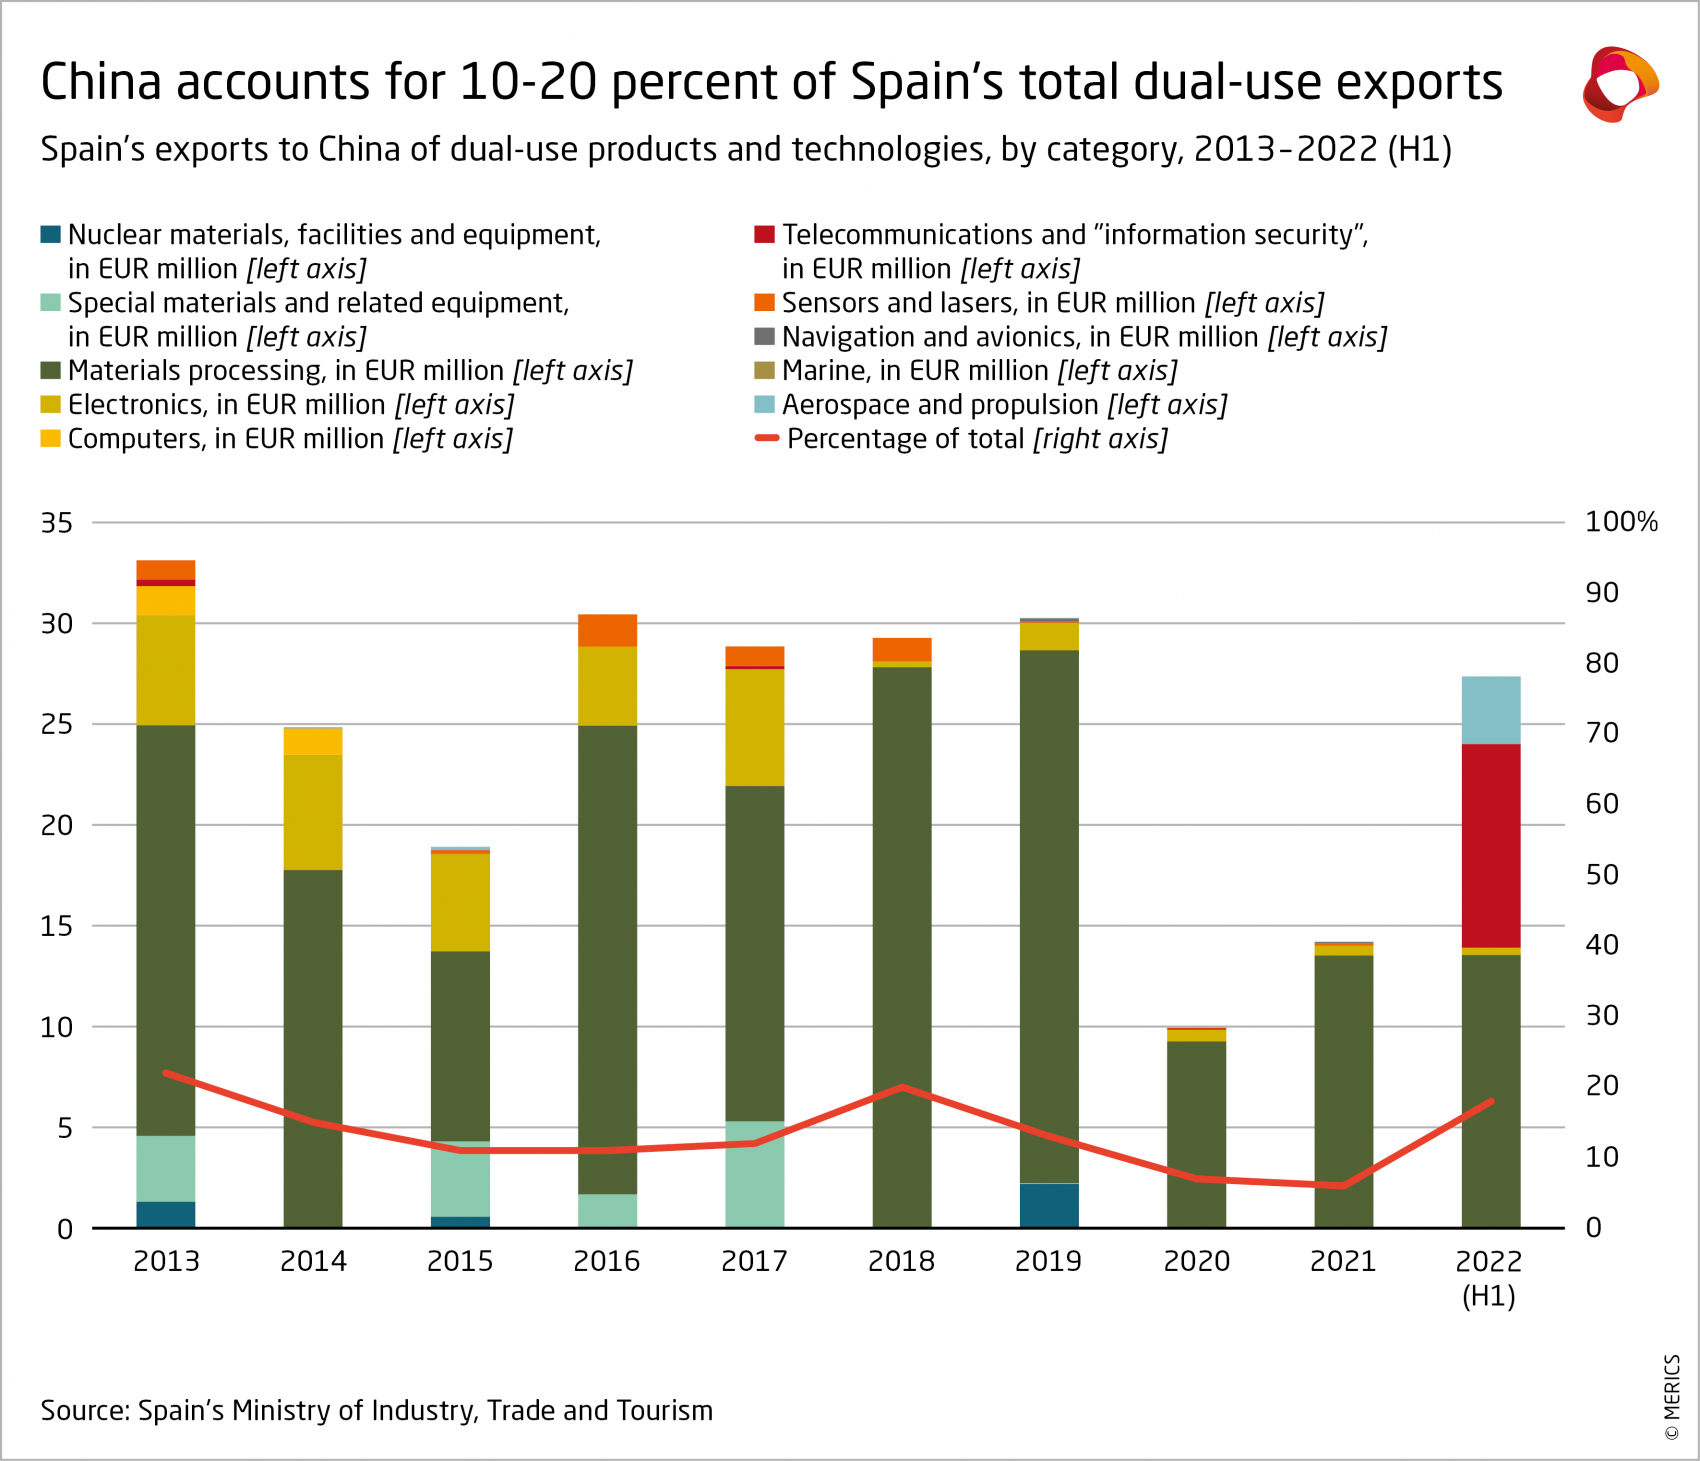 Spain's exports to China of dual-use products and technologies, 2013-2022-h1